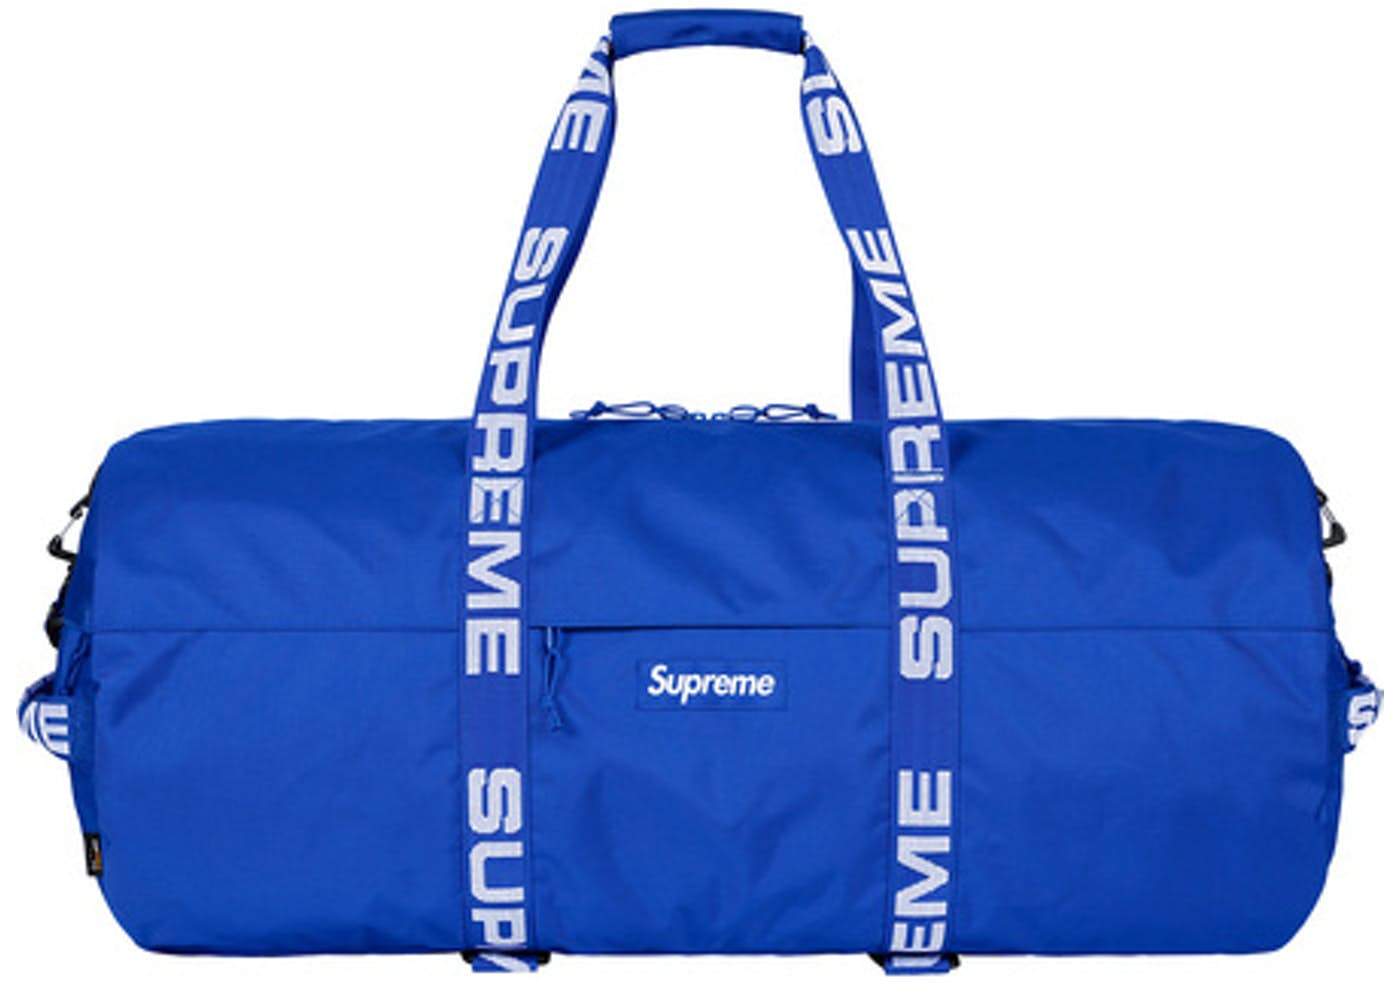 Supreme Large Duffle Bag SS18 for Sale in Honolulu, HI - OfferUp